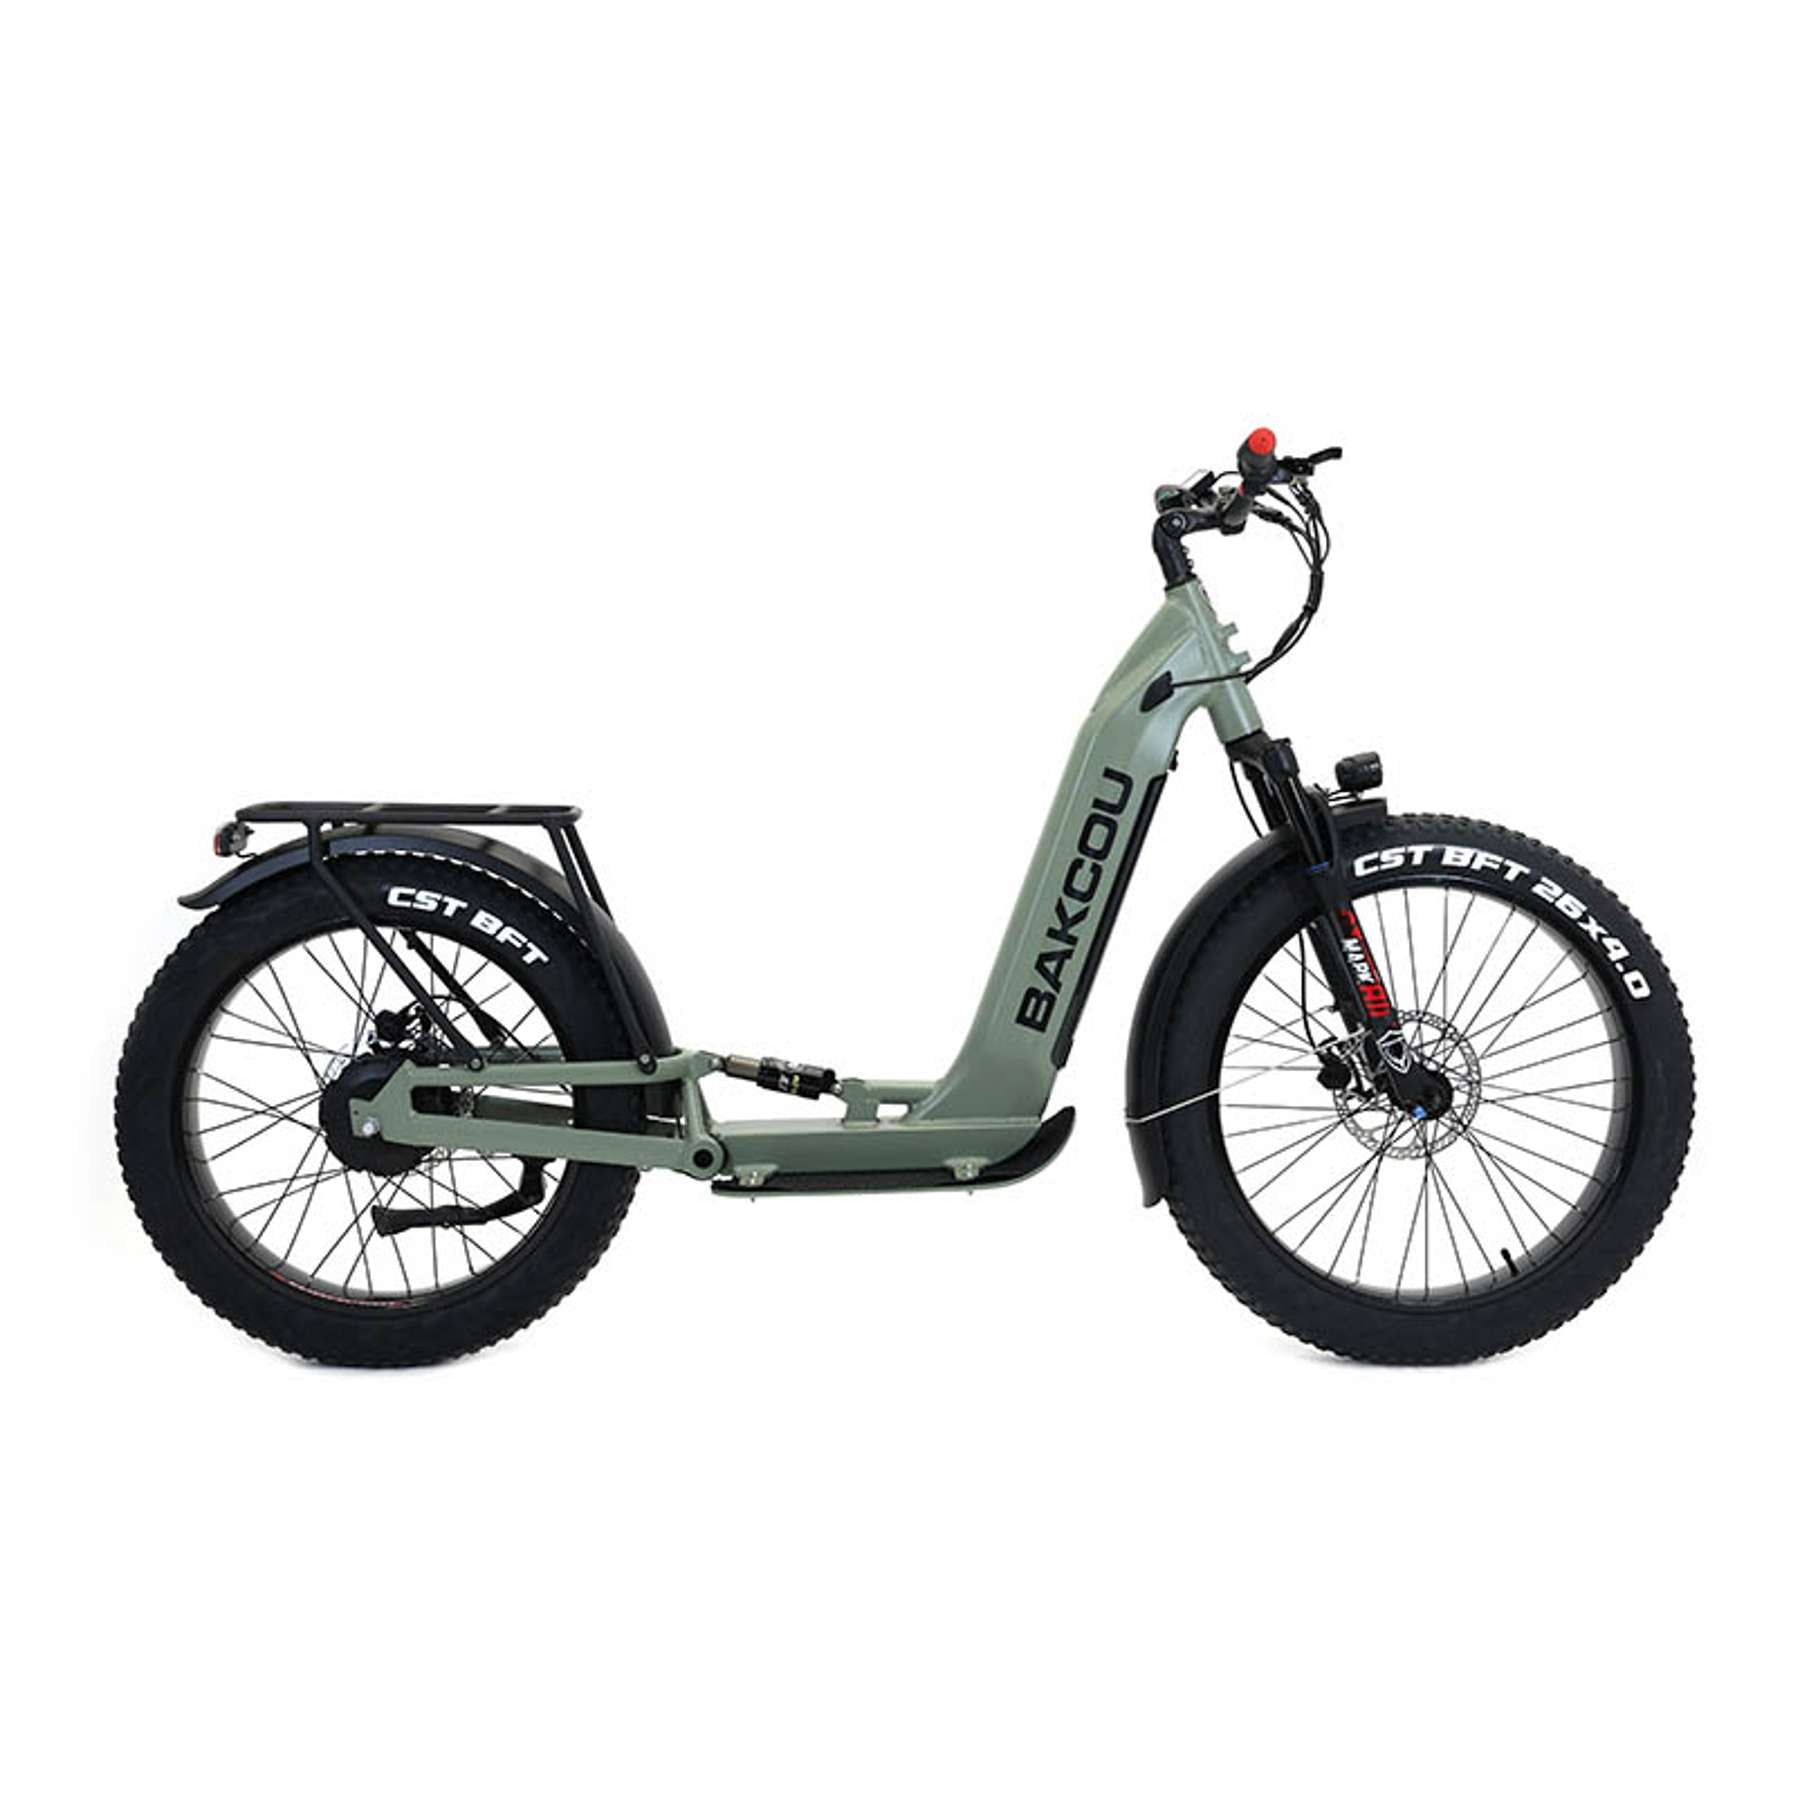 Grizzly Electric Scooter Sage Green